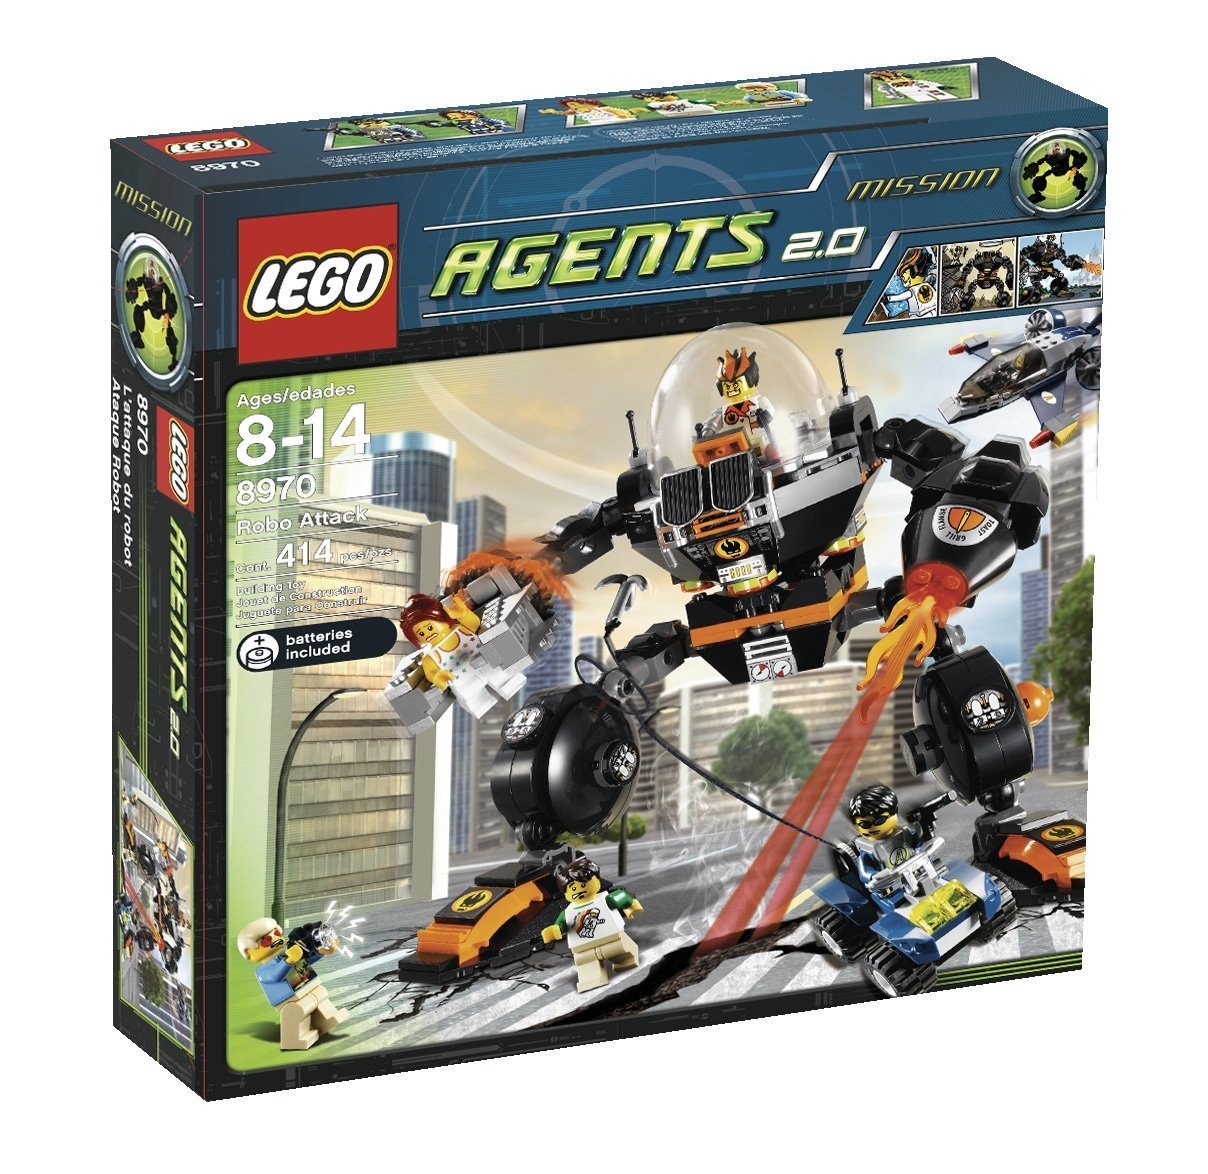 Lego Agents Robot Attack